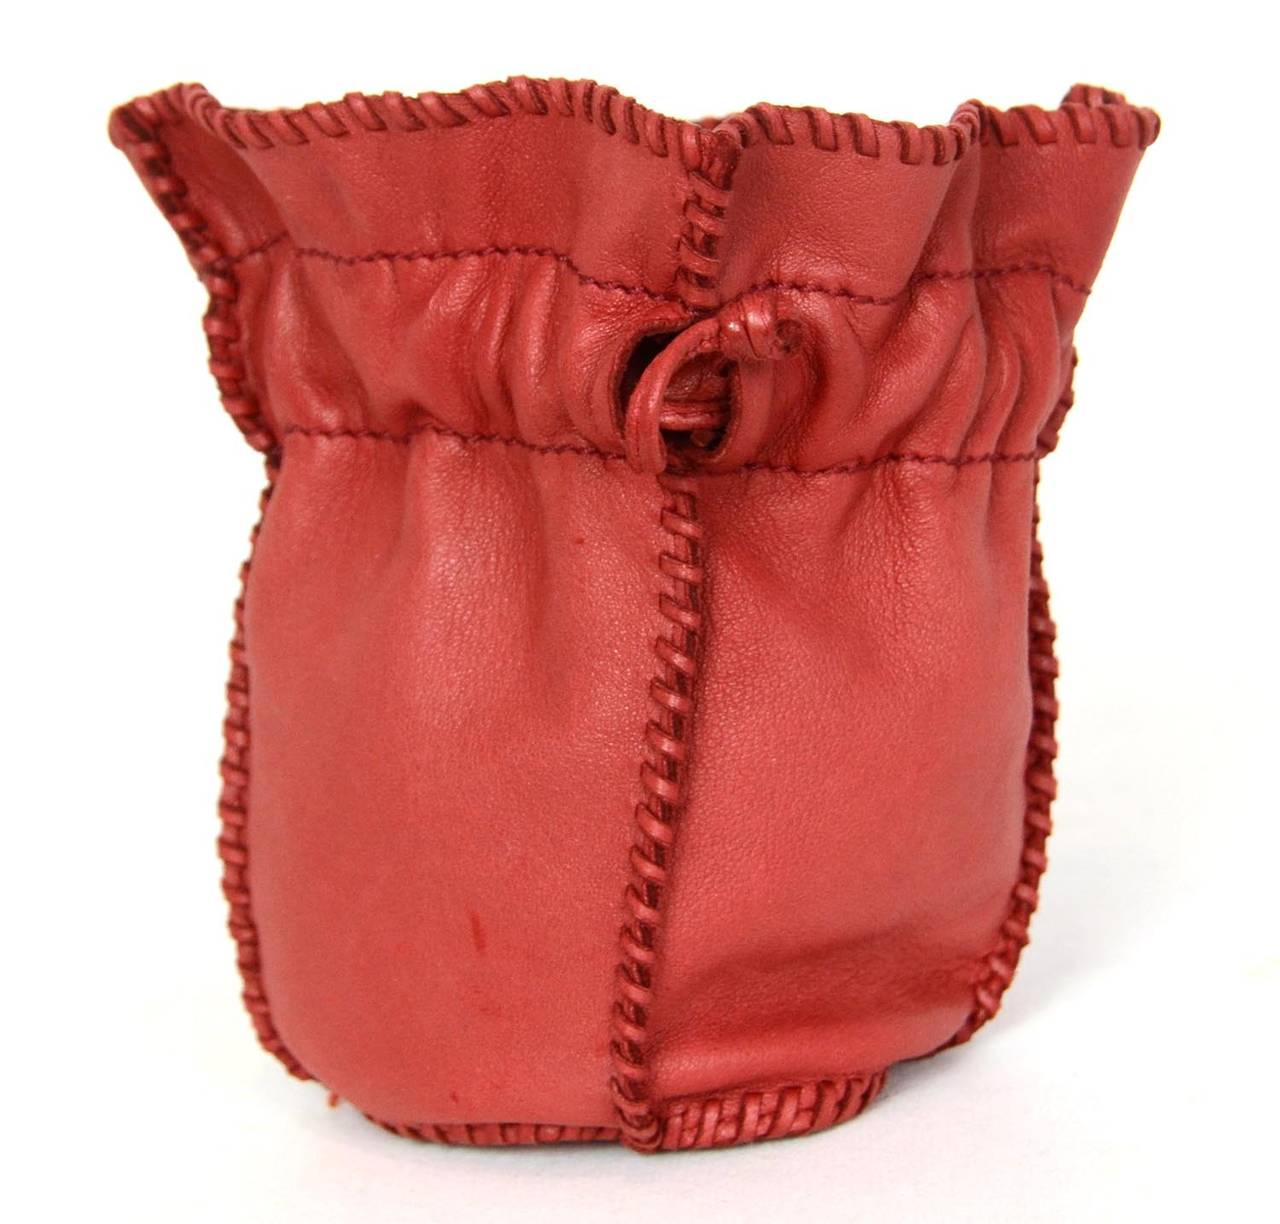 Hermes Red Leather Drawstring Jewelry/Accessory Pouch with Whipstitch Detail 2